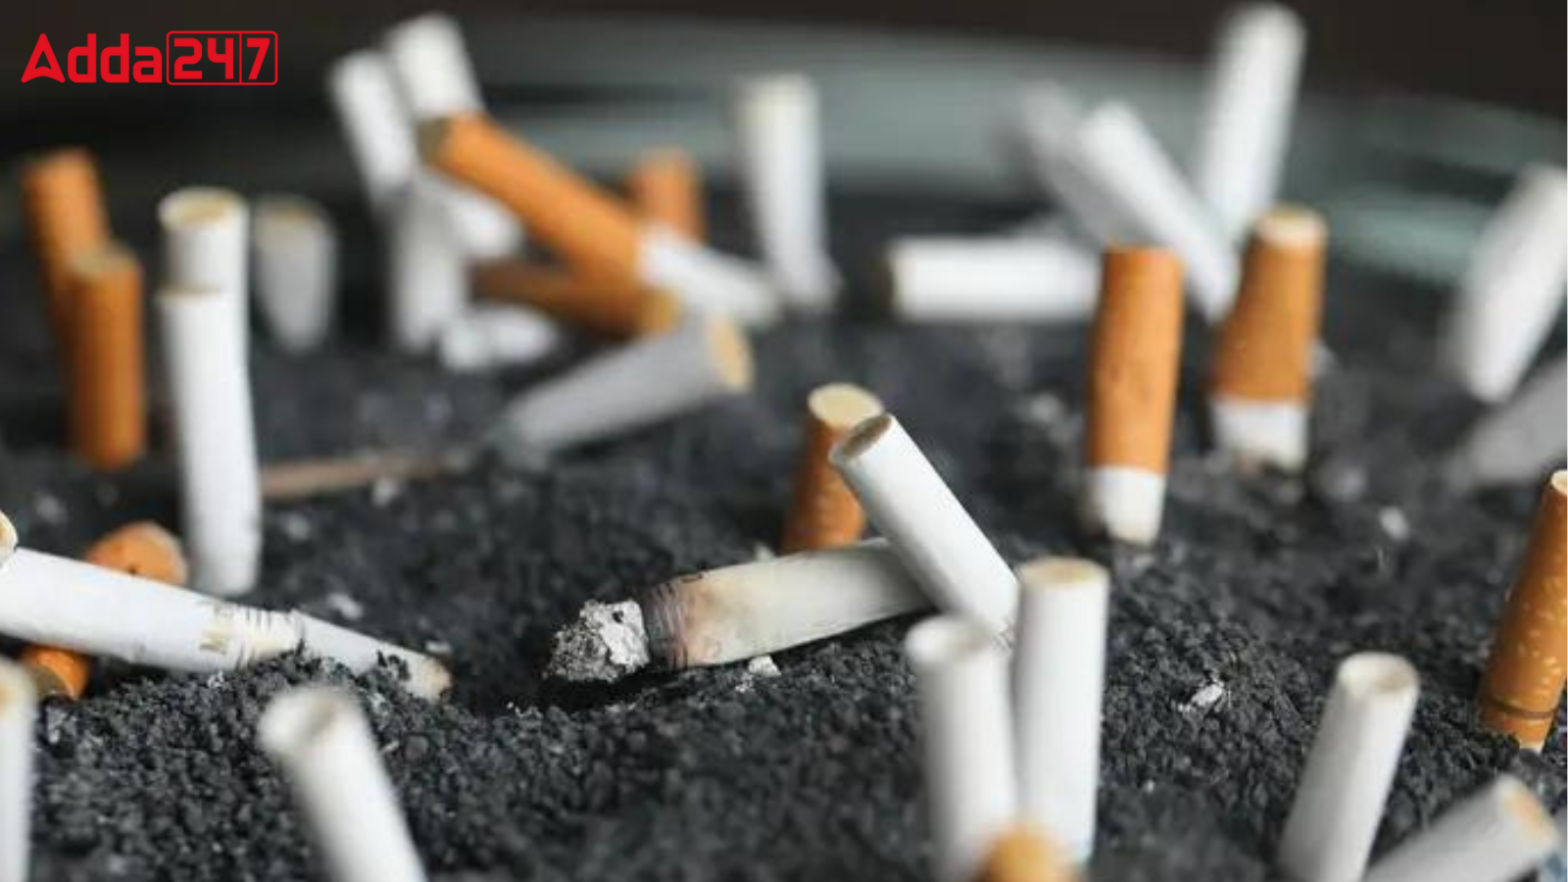 New Zealand to Repeal Anti-Tobacco Law